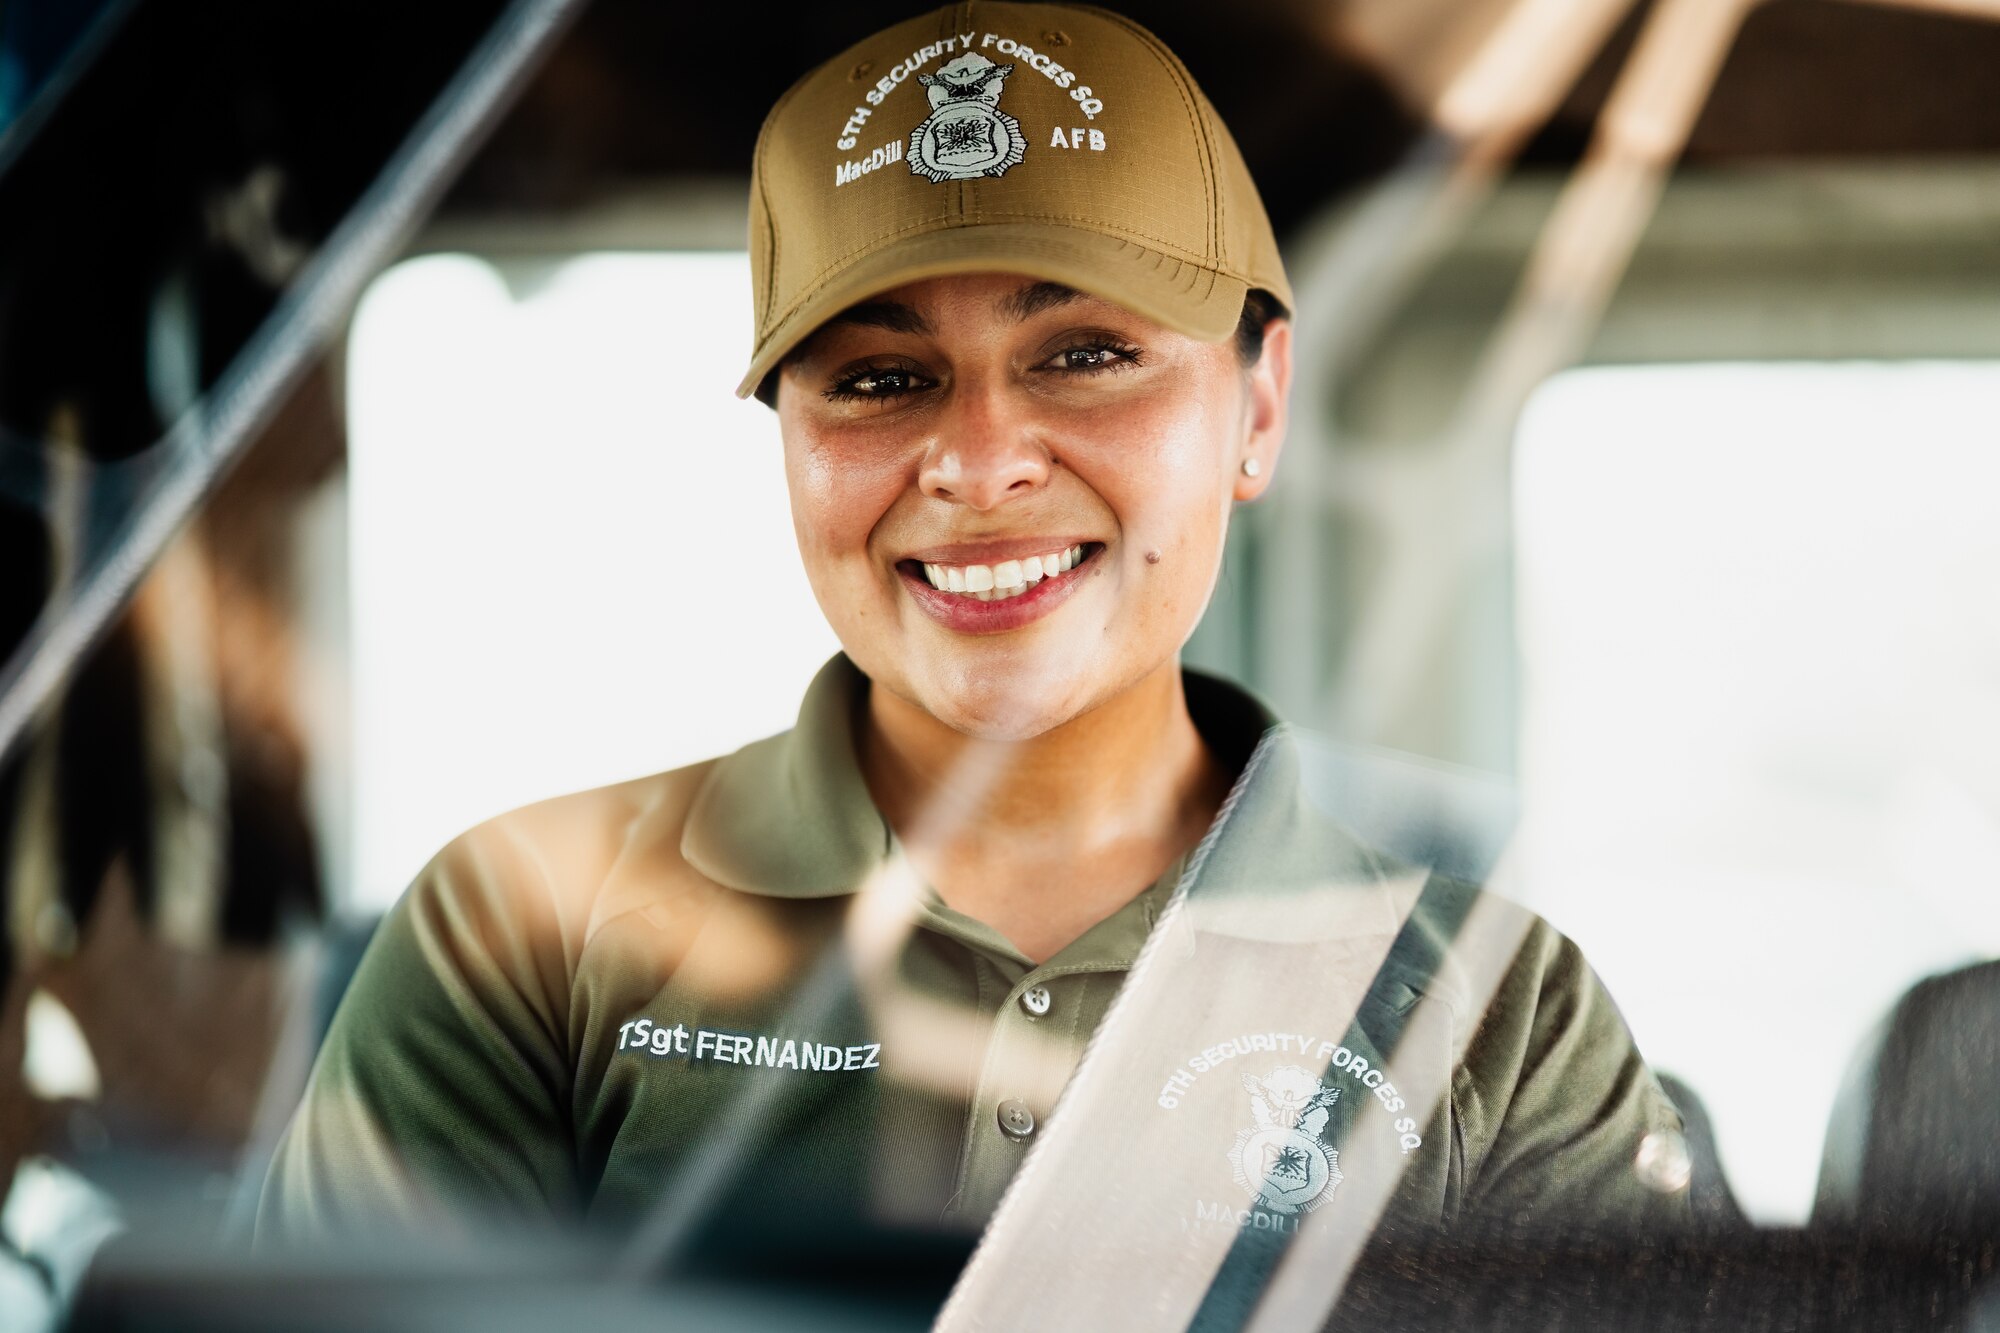 The U.S. Air Force recognized Fernandez as one of the 12 Outstanding Airmen of the Year for 2022 for her excellence as a military training instructor for basic military training, a flight sergeant and marine patrol lead. Fernandez’s current role as a marine patrol lead involves protecting over 7 miles of coastline at MacDill and ensuring the base’s security.